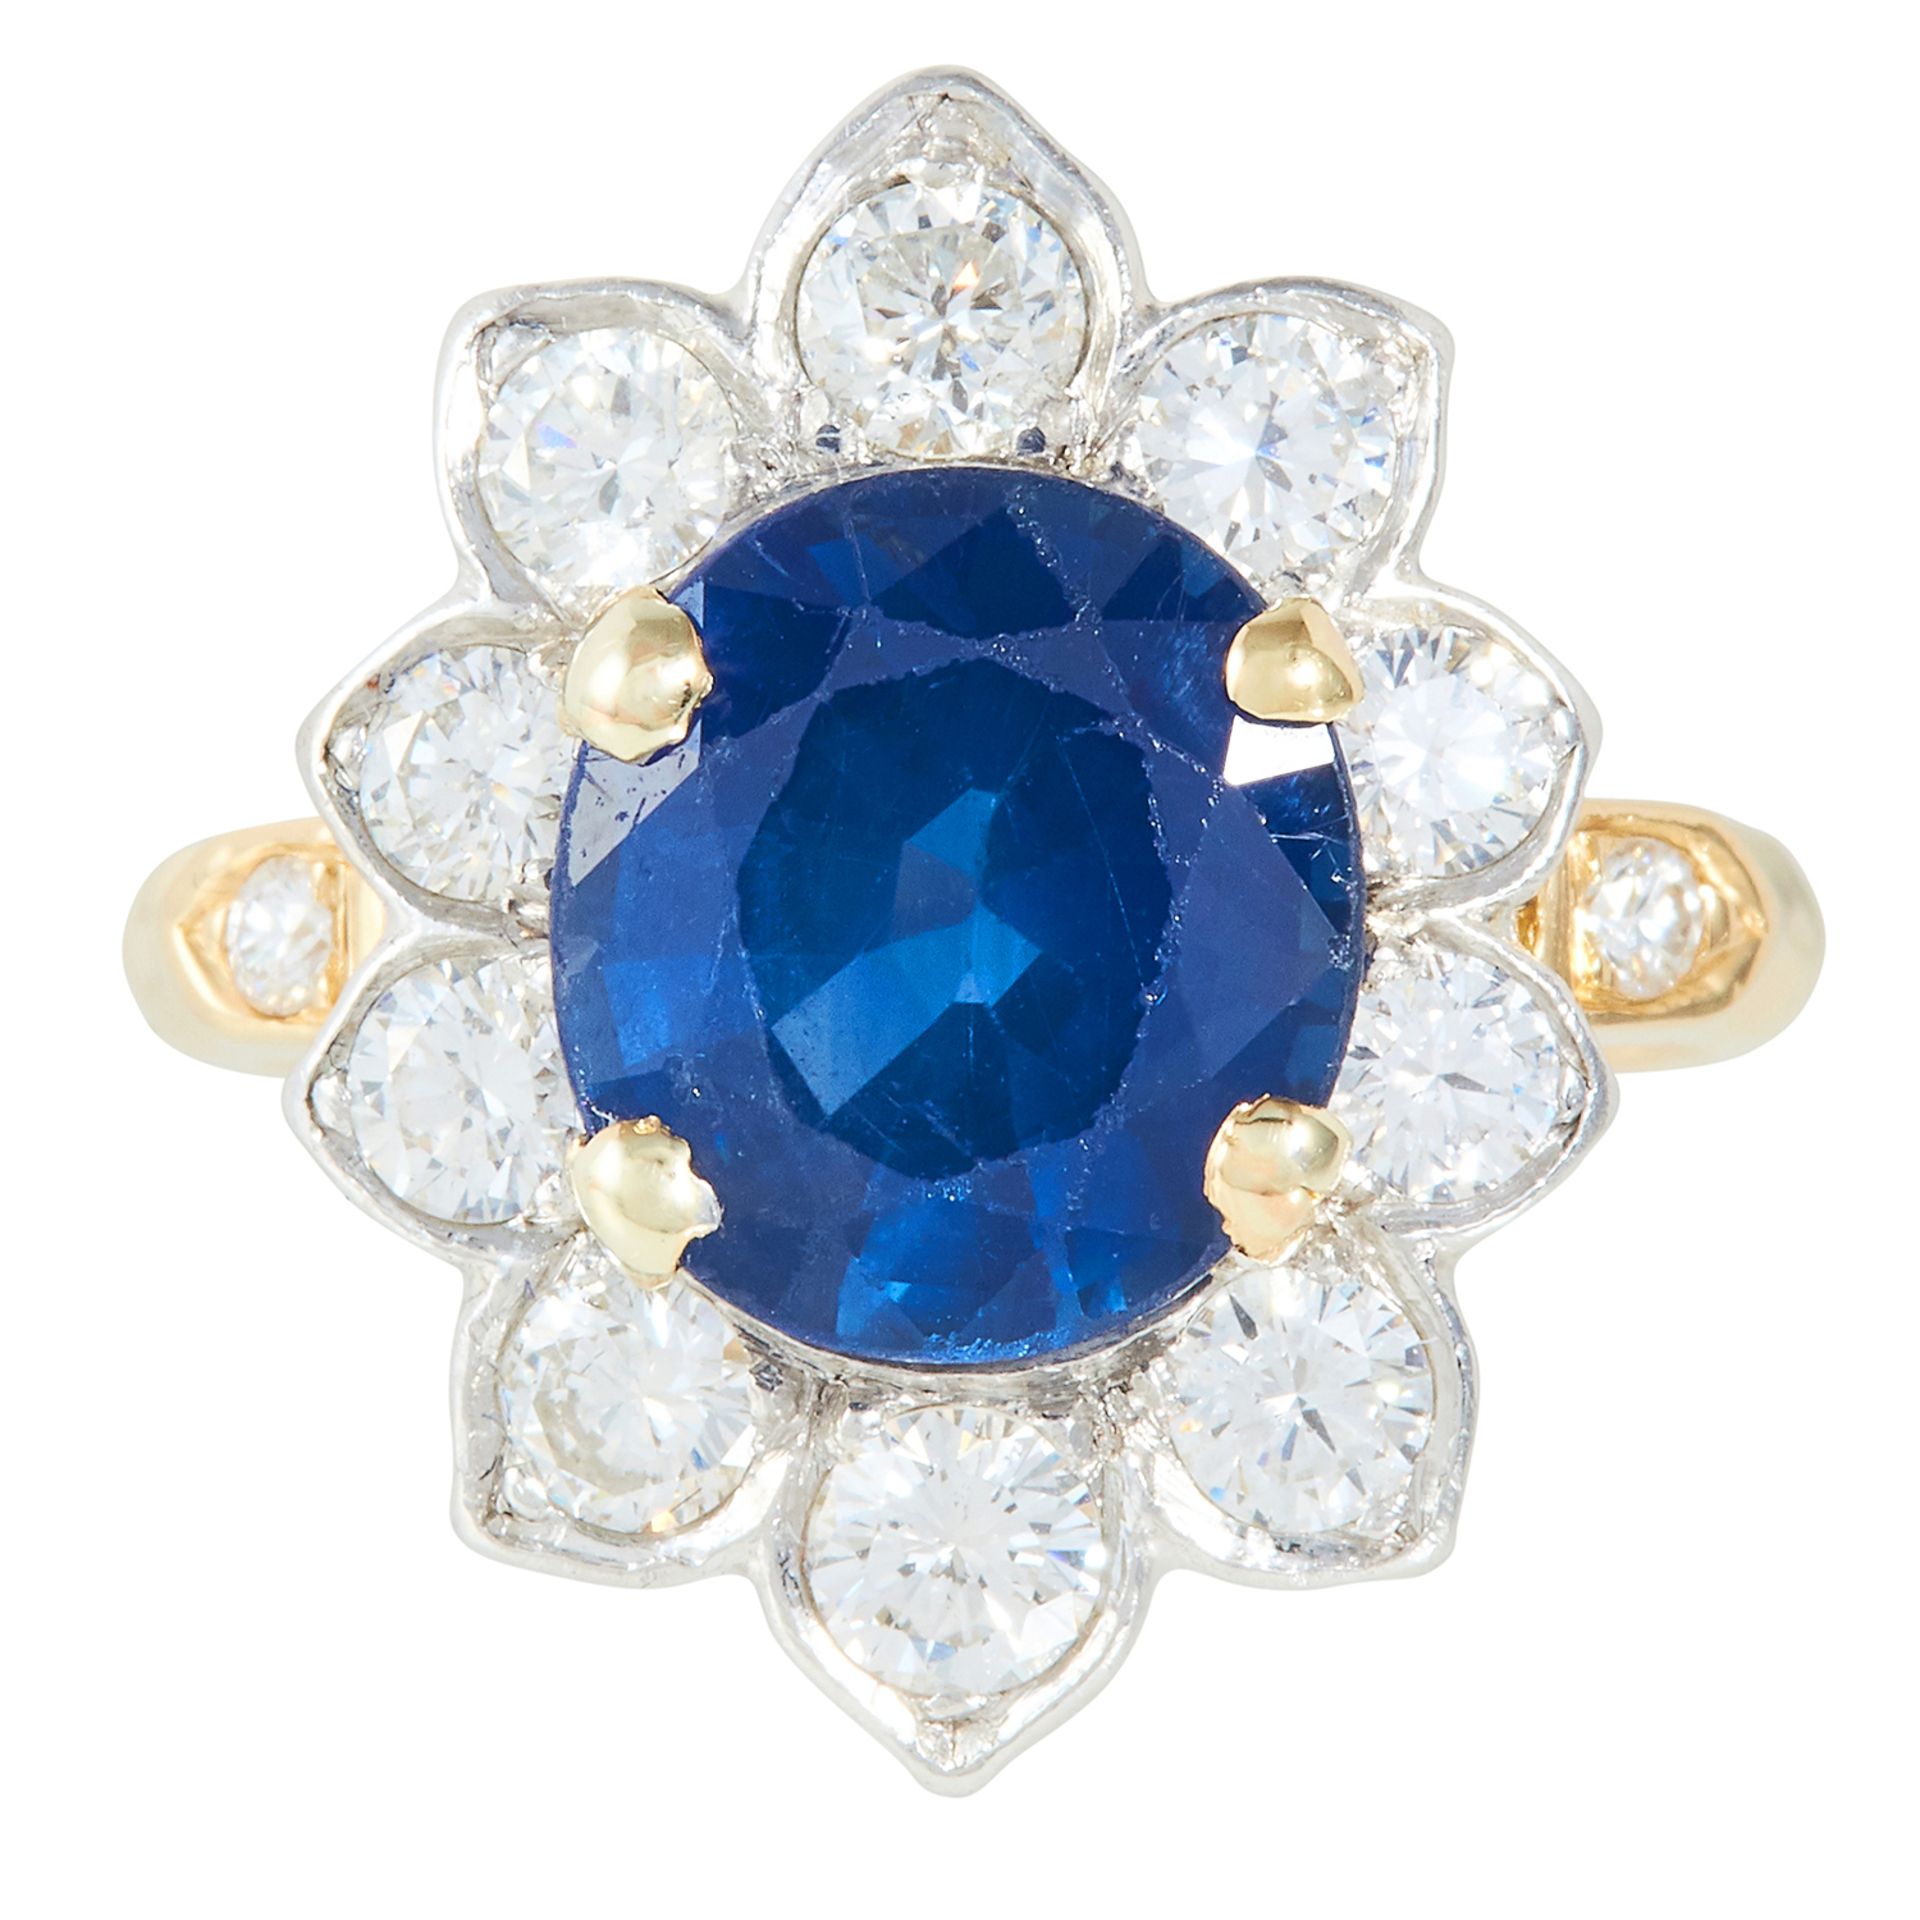 A 3.25 CARAT SAPPHIRE AND DIAMOND CLUSTER RING in yellow gold, set with an oval cut sapphire of